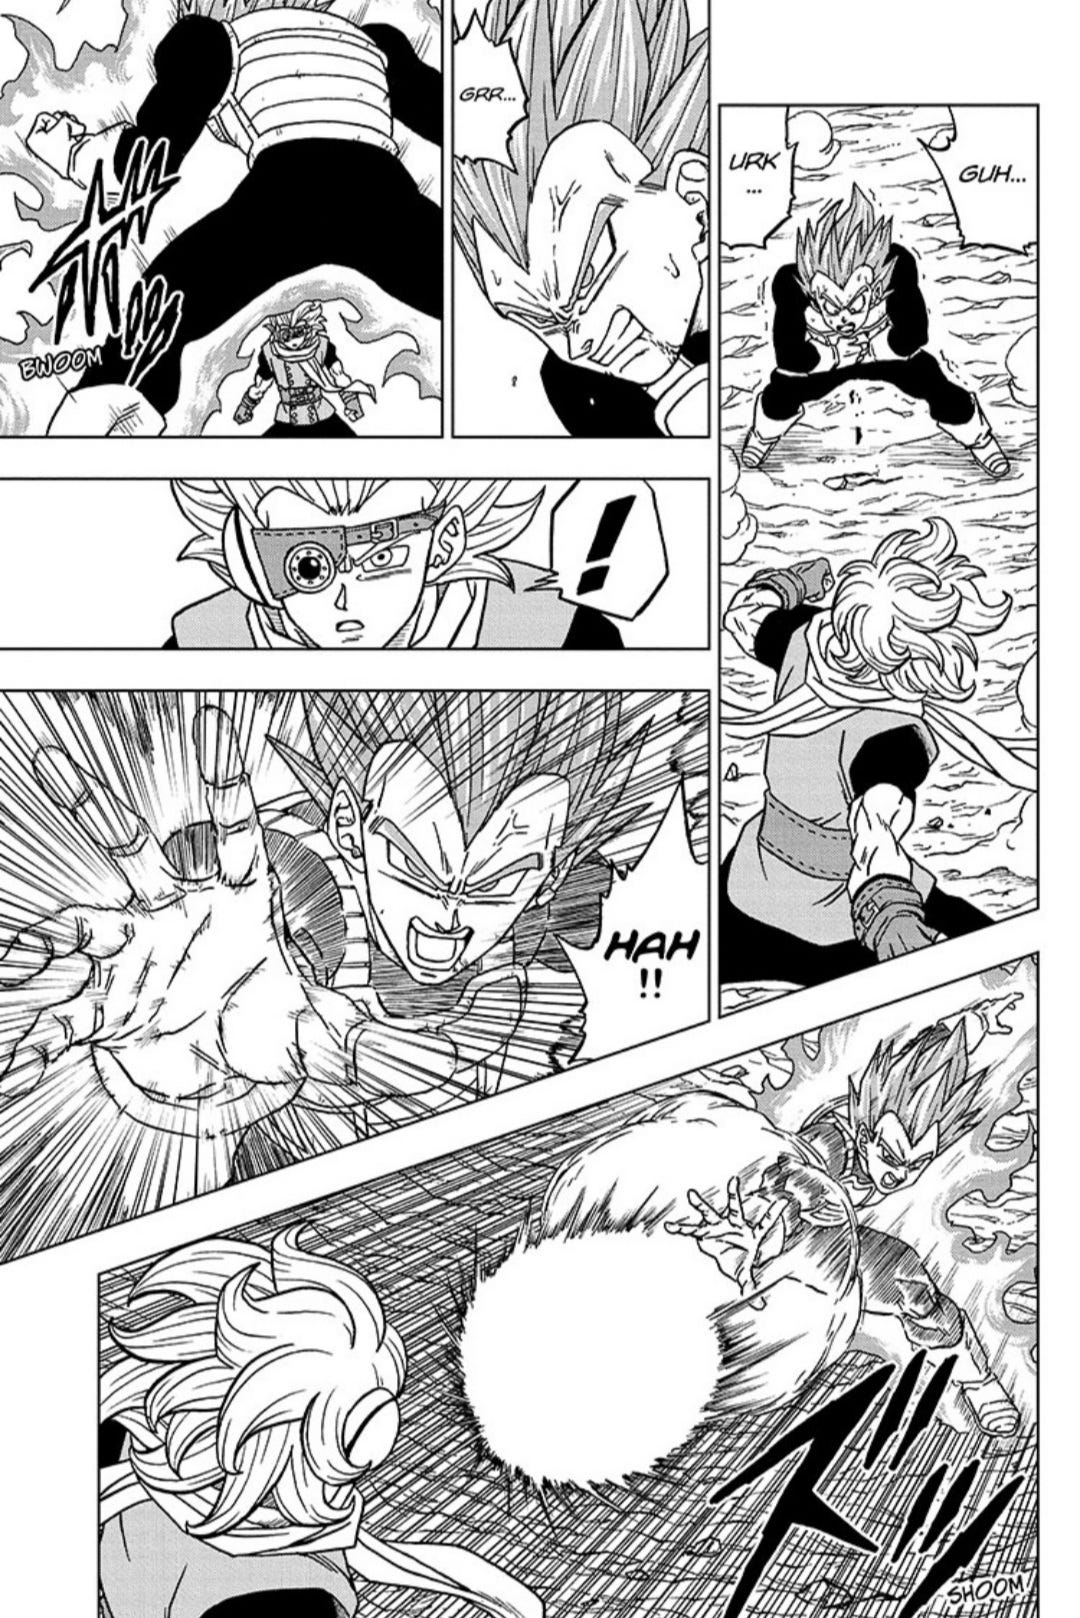 Why did Toyotaro utterly humiliate Vegeta in the Moro arc after hyping him  up the entire time? He didn't even give him one full chapter of glory after  training. Did he do